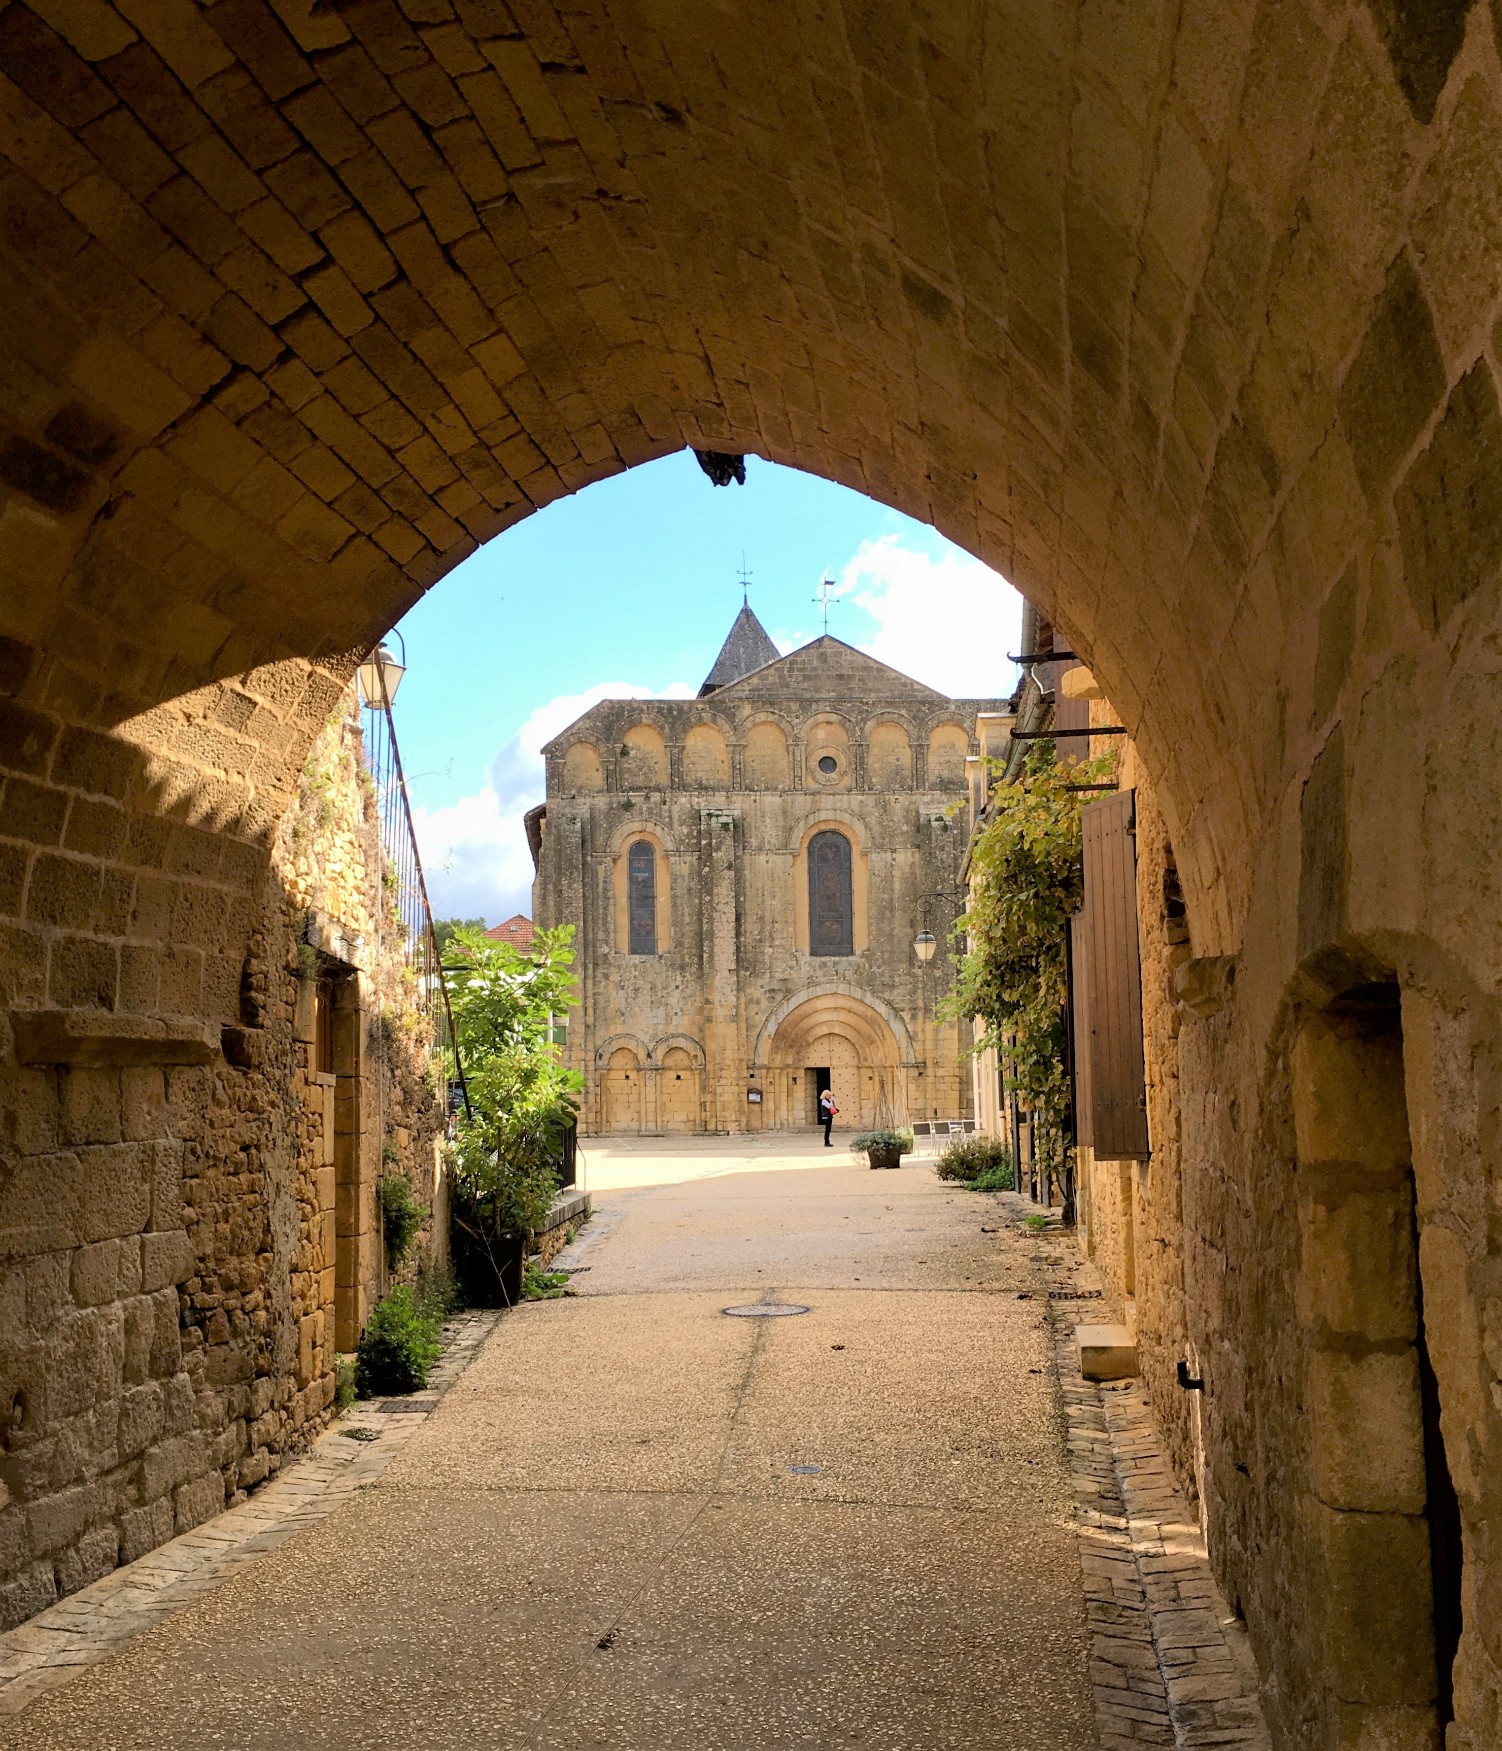 Lovely Cadouin with its UNESCO listed 12thC Abbey